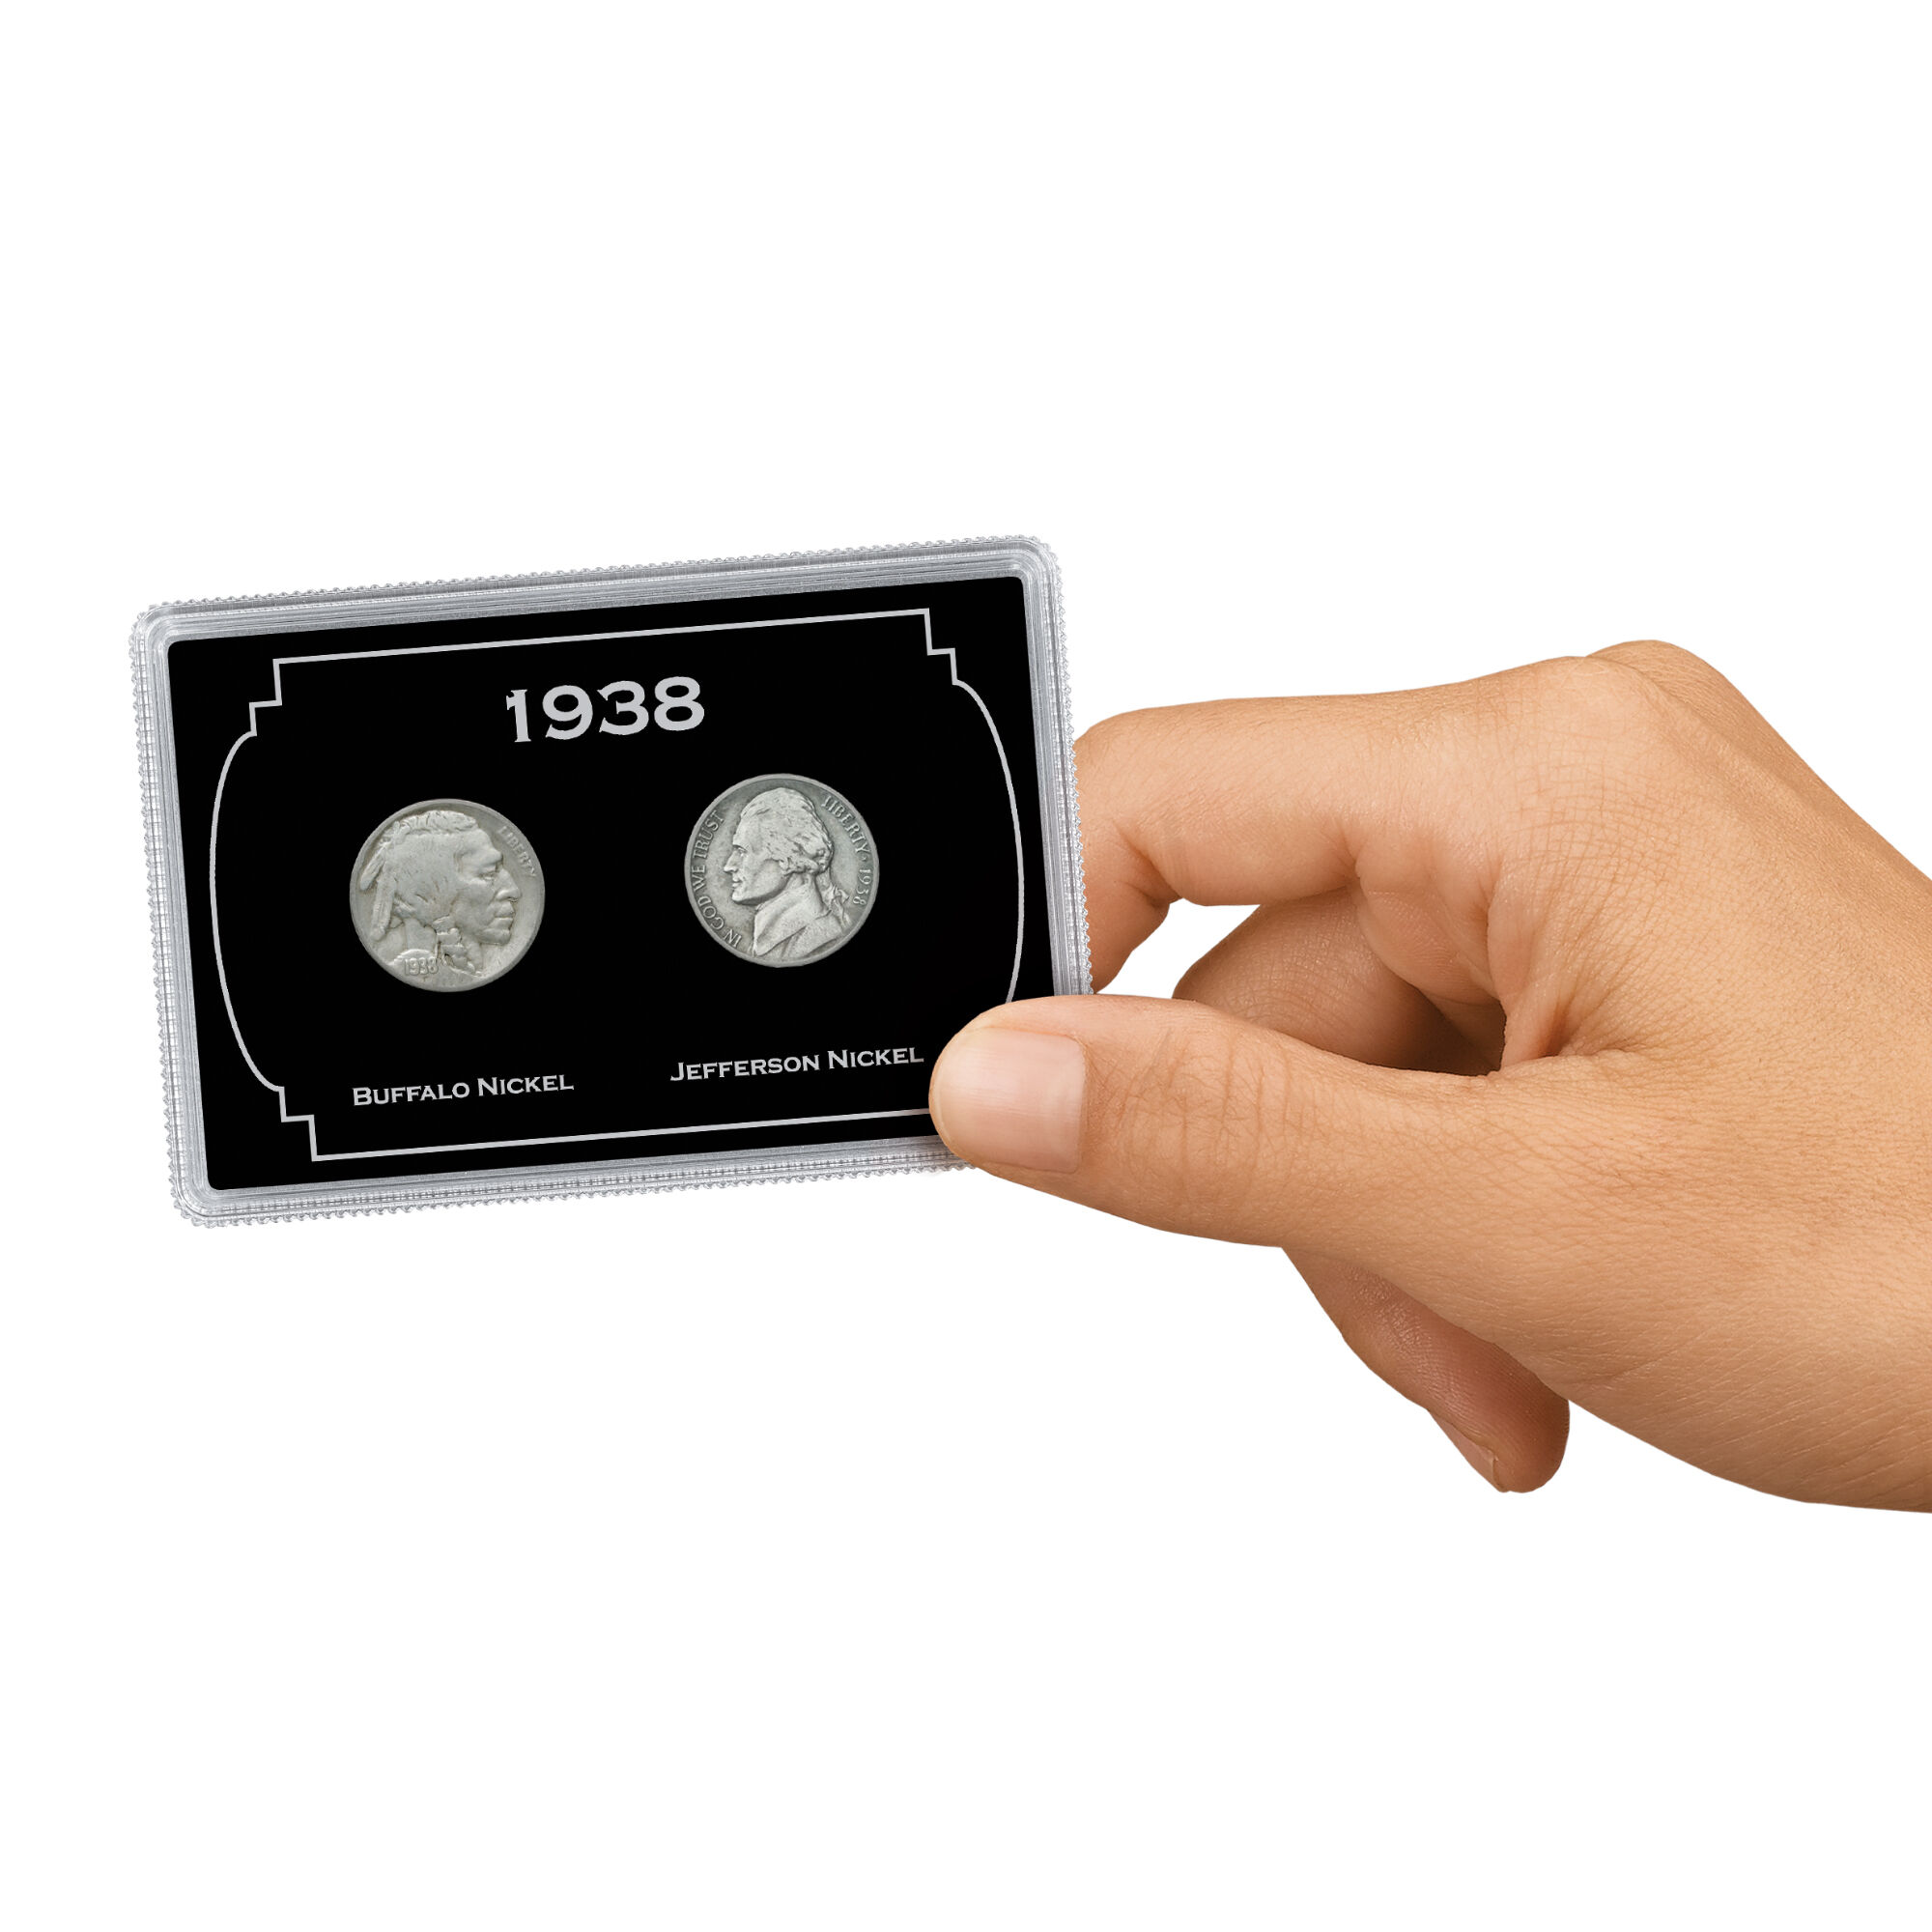 The First and Last Year Dual Dated Coin Set 10124 0018 f handshot